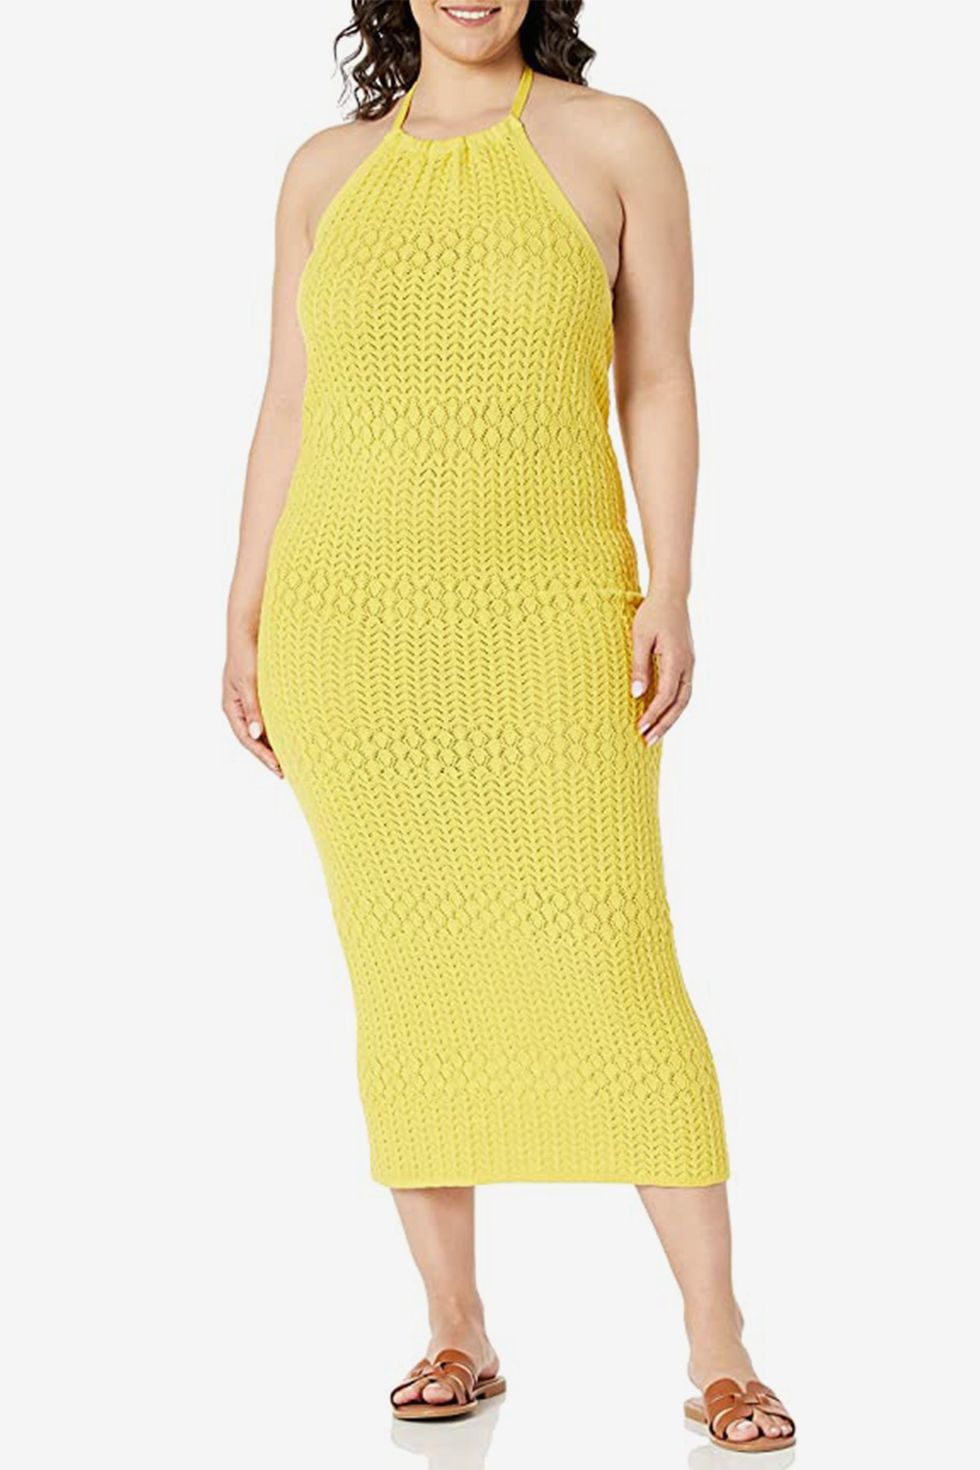  OTHER STORIES Knitted Mini Tube Top in Yellow